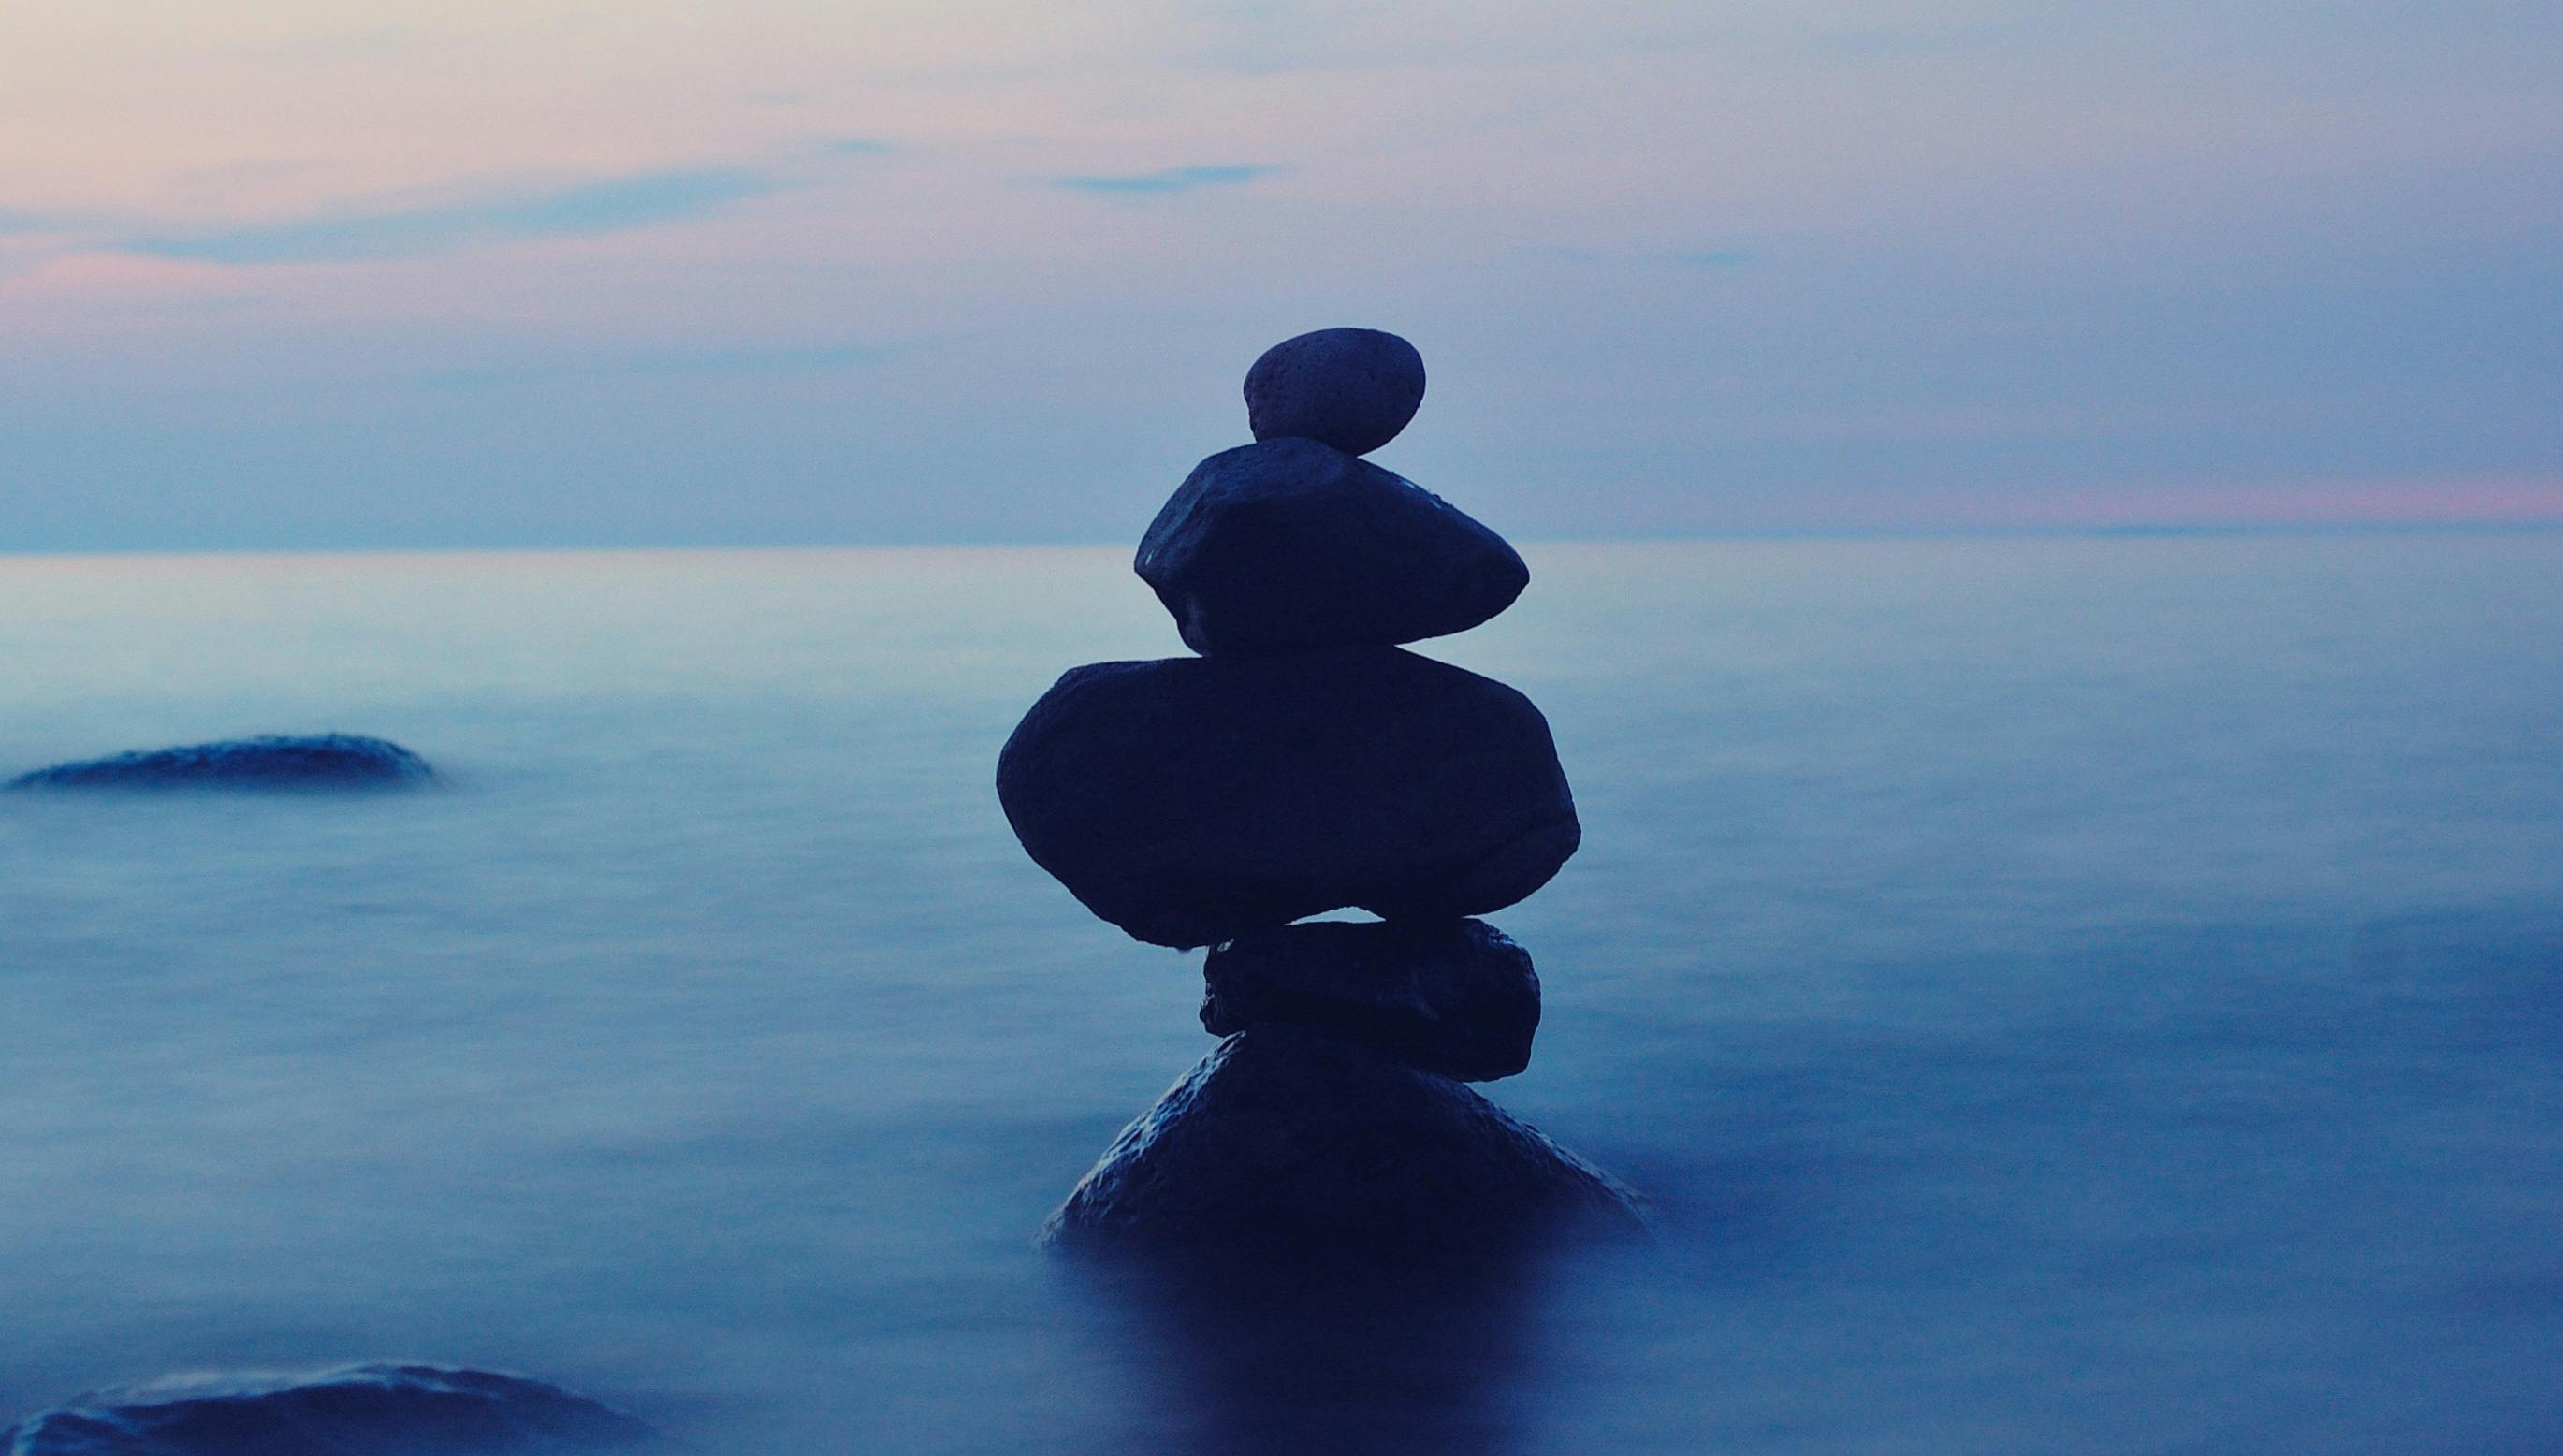 Free stock photo of balance, ocean, relaxation